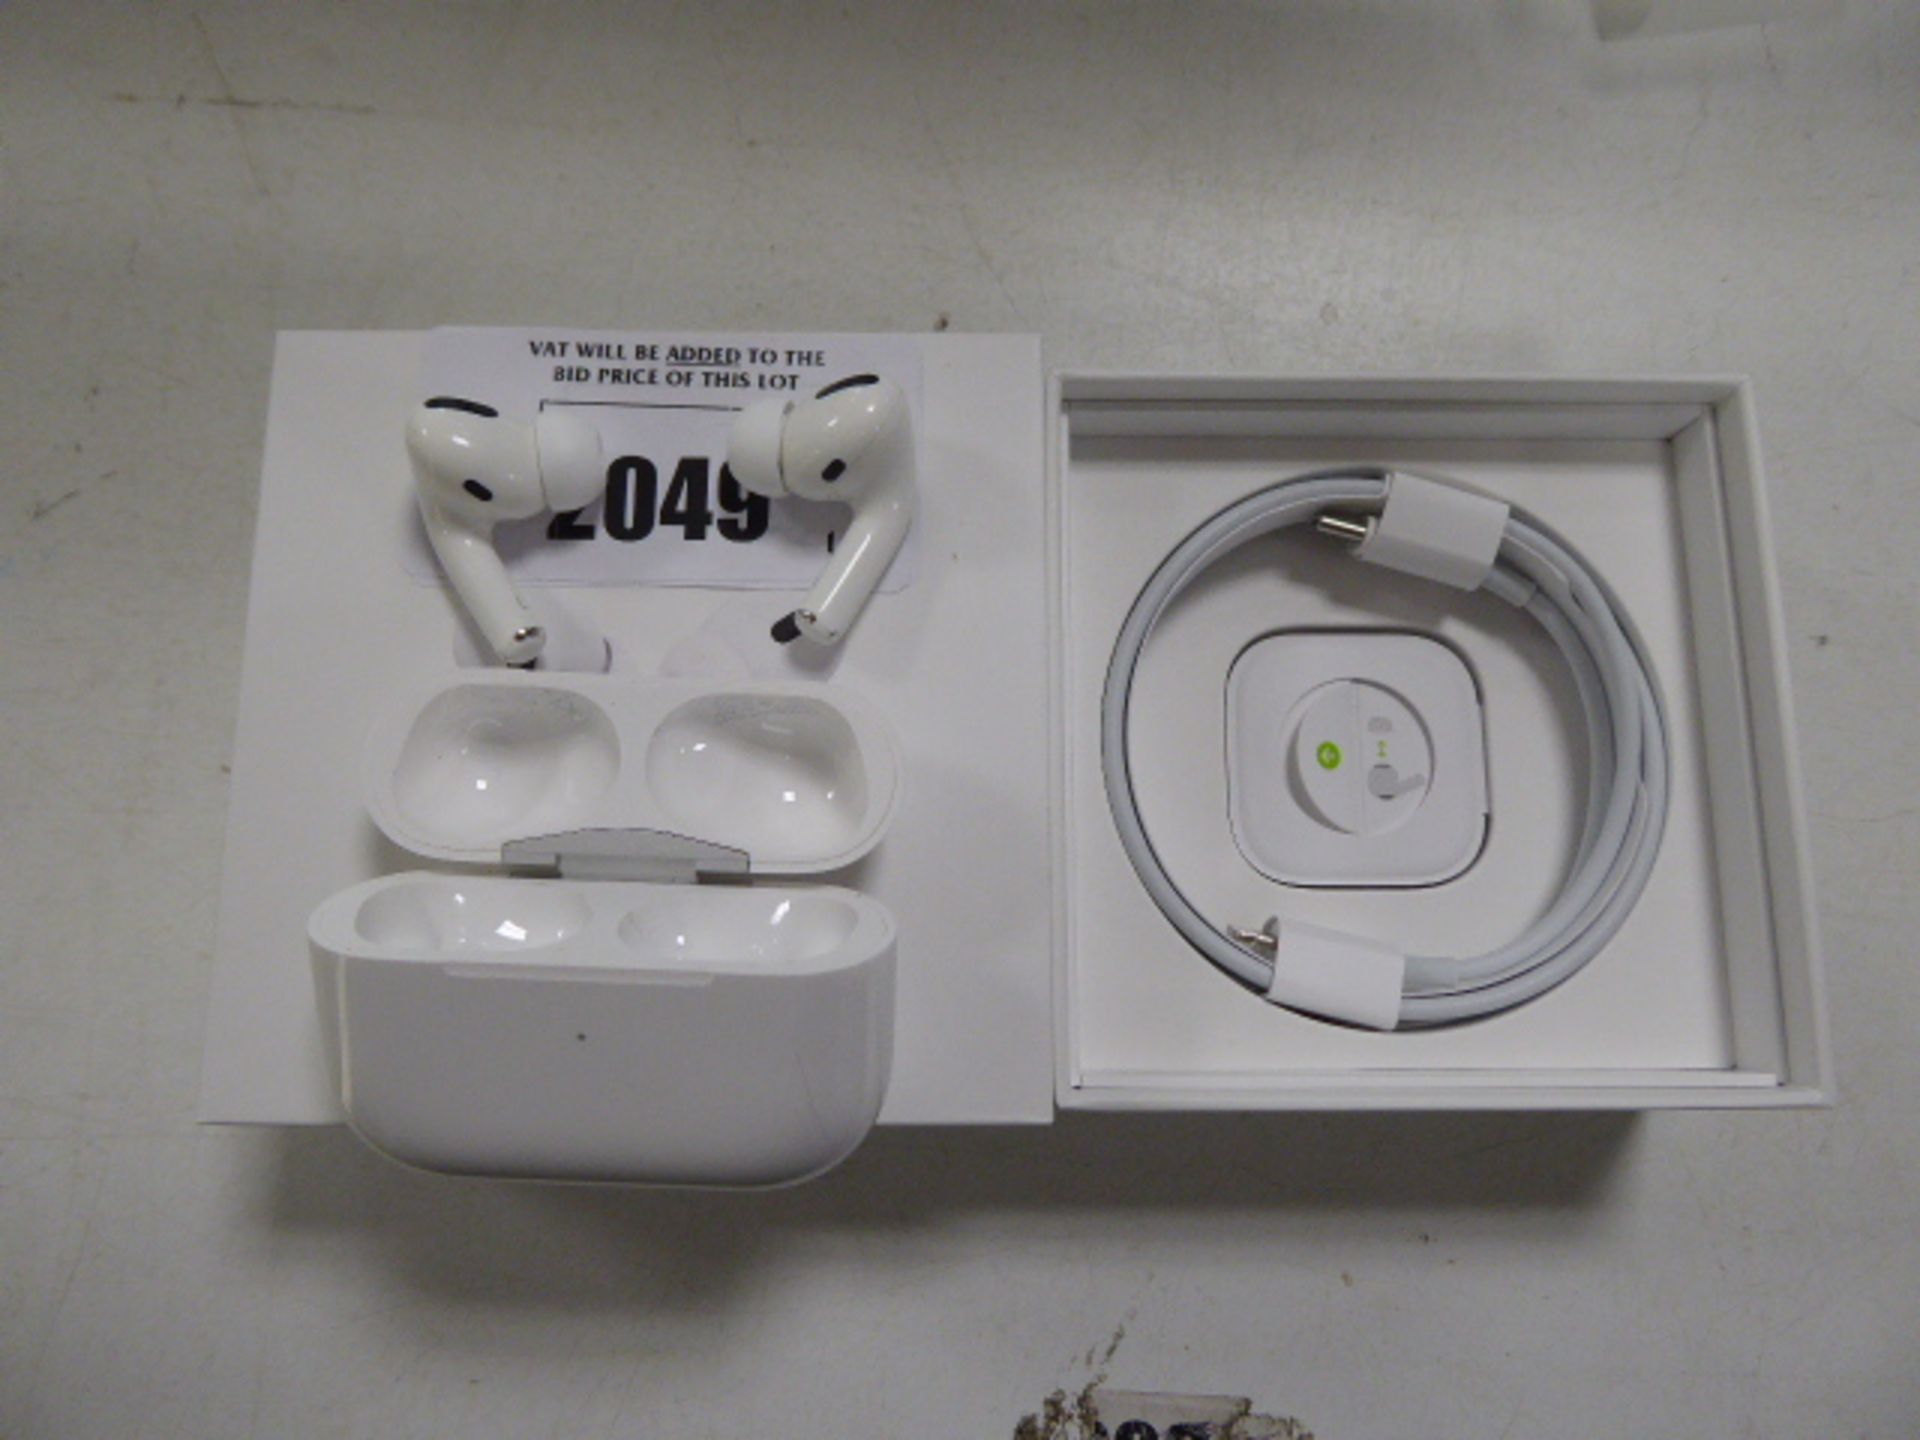 Pair of Apple Airpods Pro with wireless charging case and box